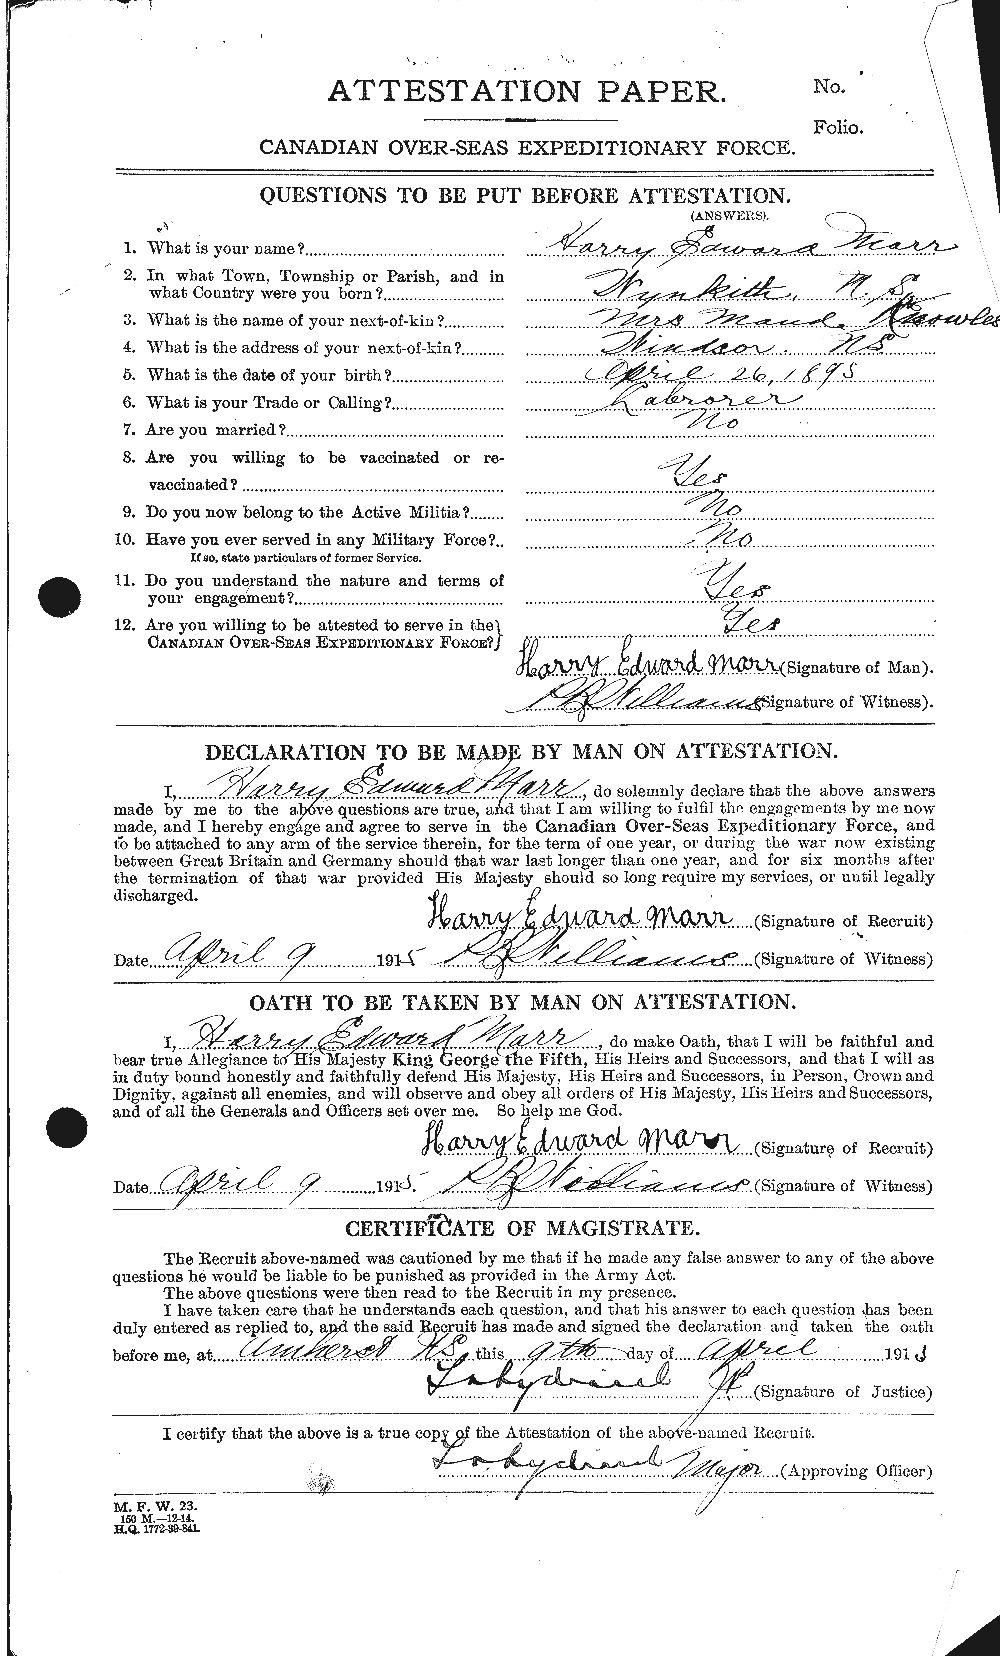 Personnel Records of the First World War - CEF 485635a